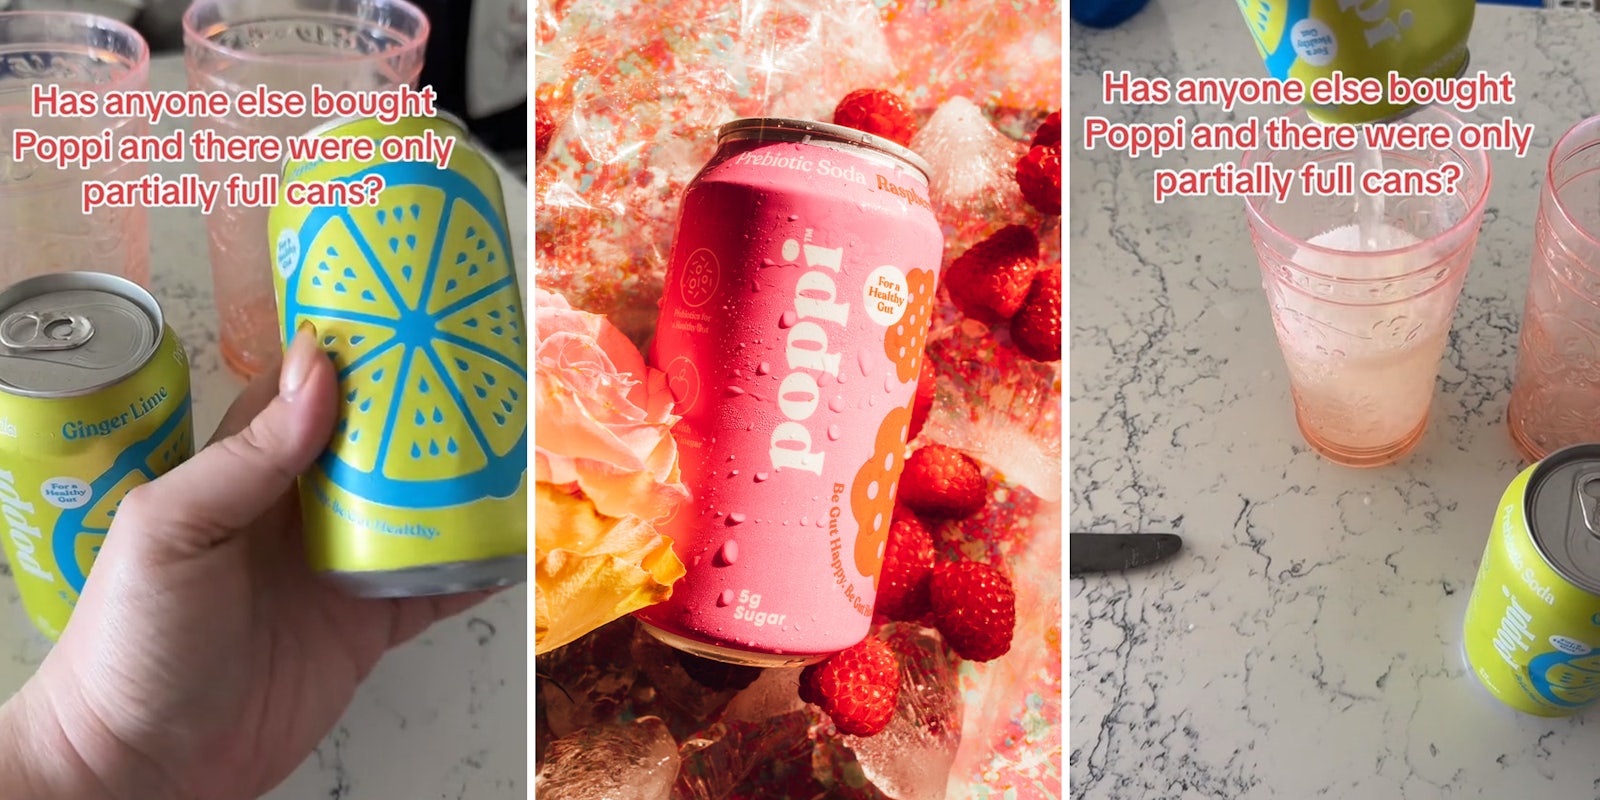 Customer calls out Poppi soda for half-filled cans